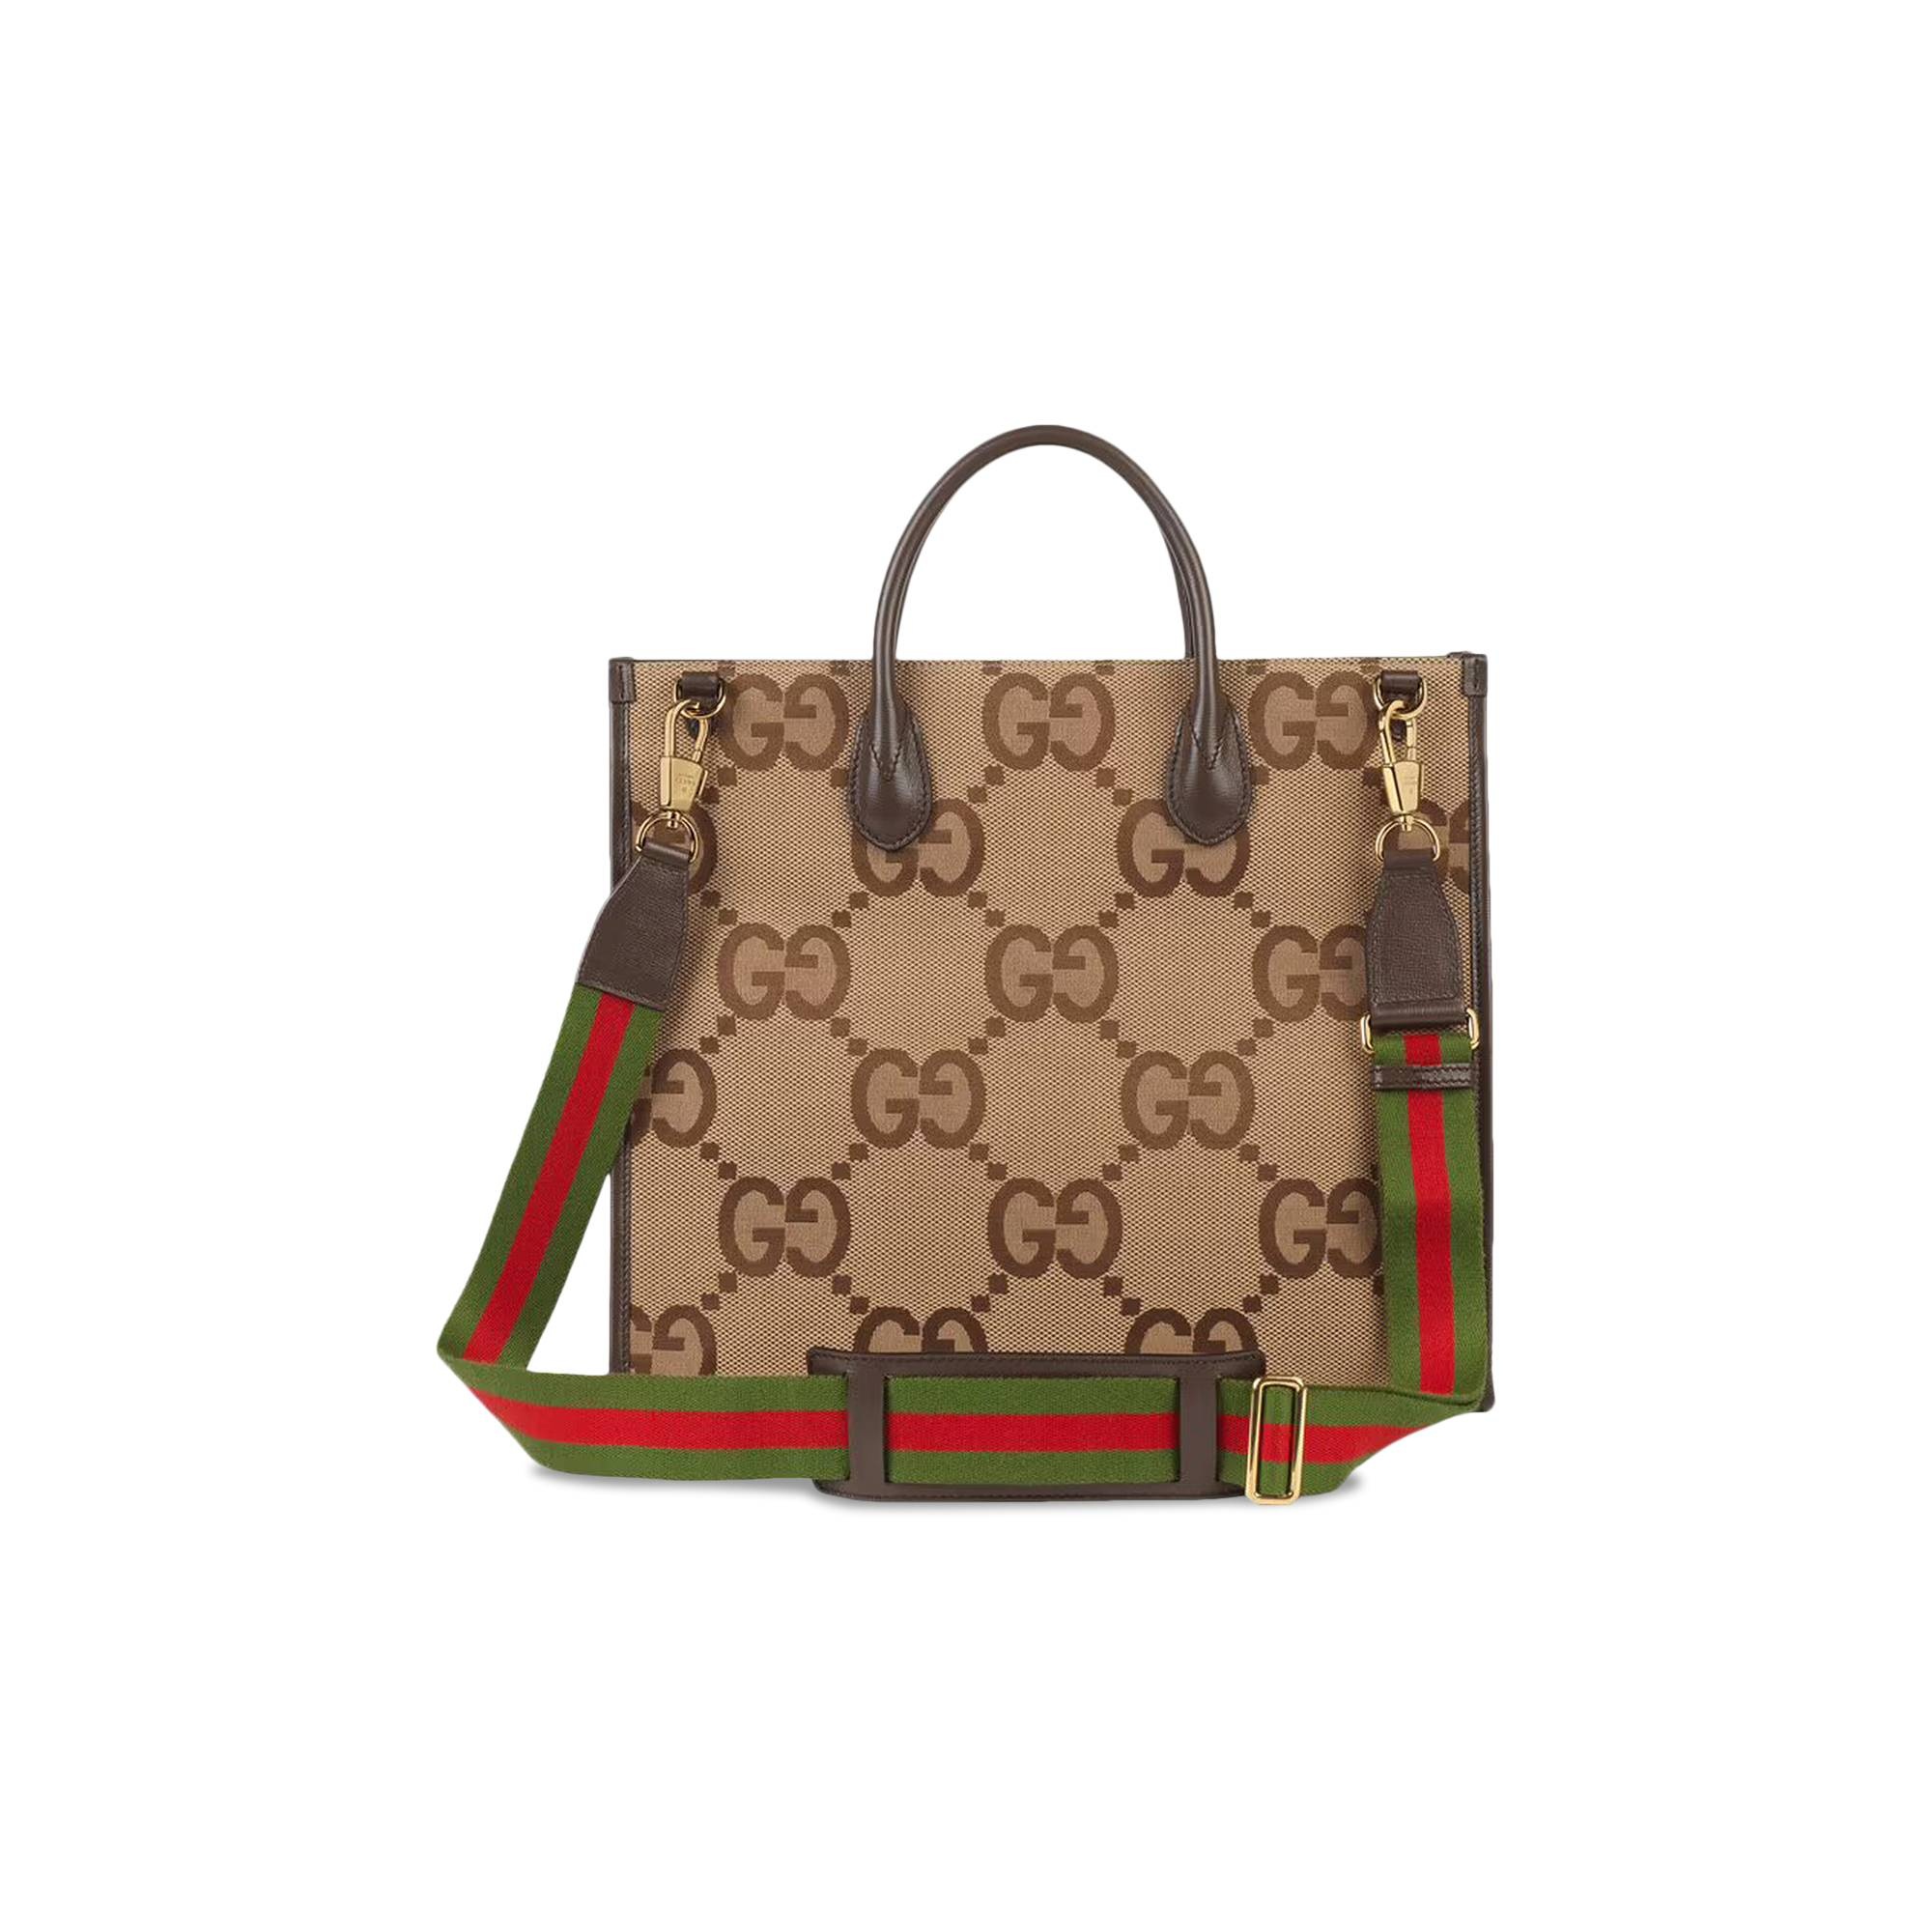 Gucci x Palace GG Jumbo Canvas Tote Bag With Web Details 'Beige' - 2